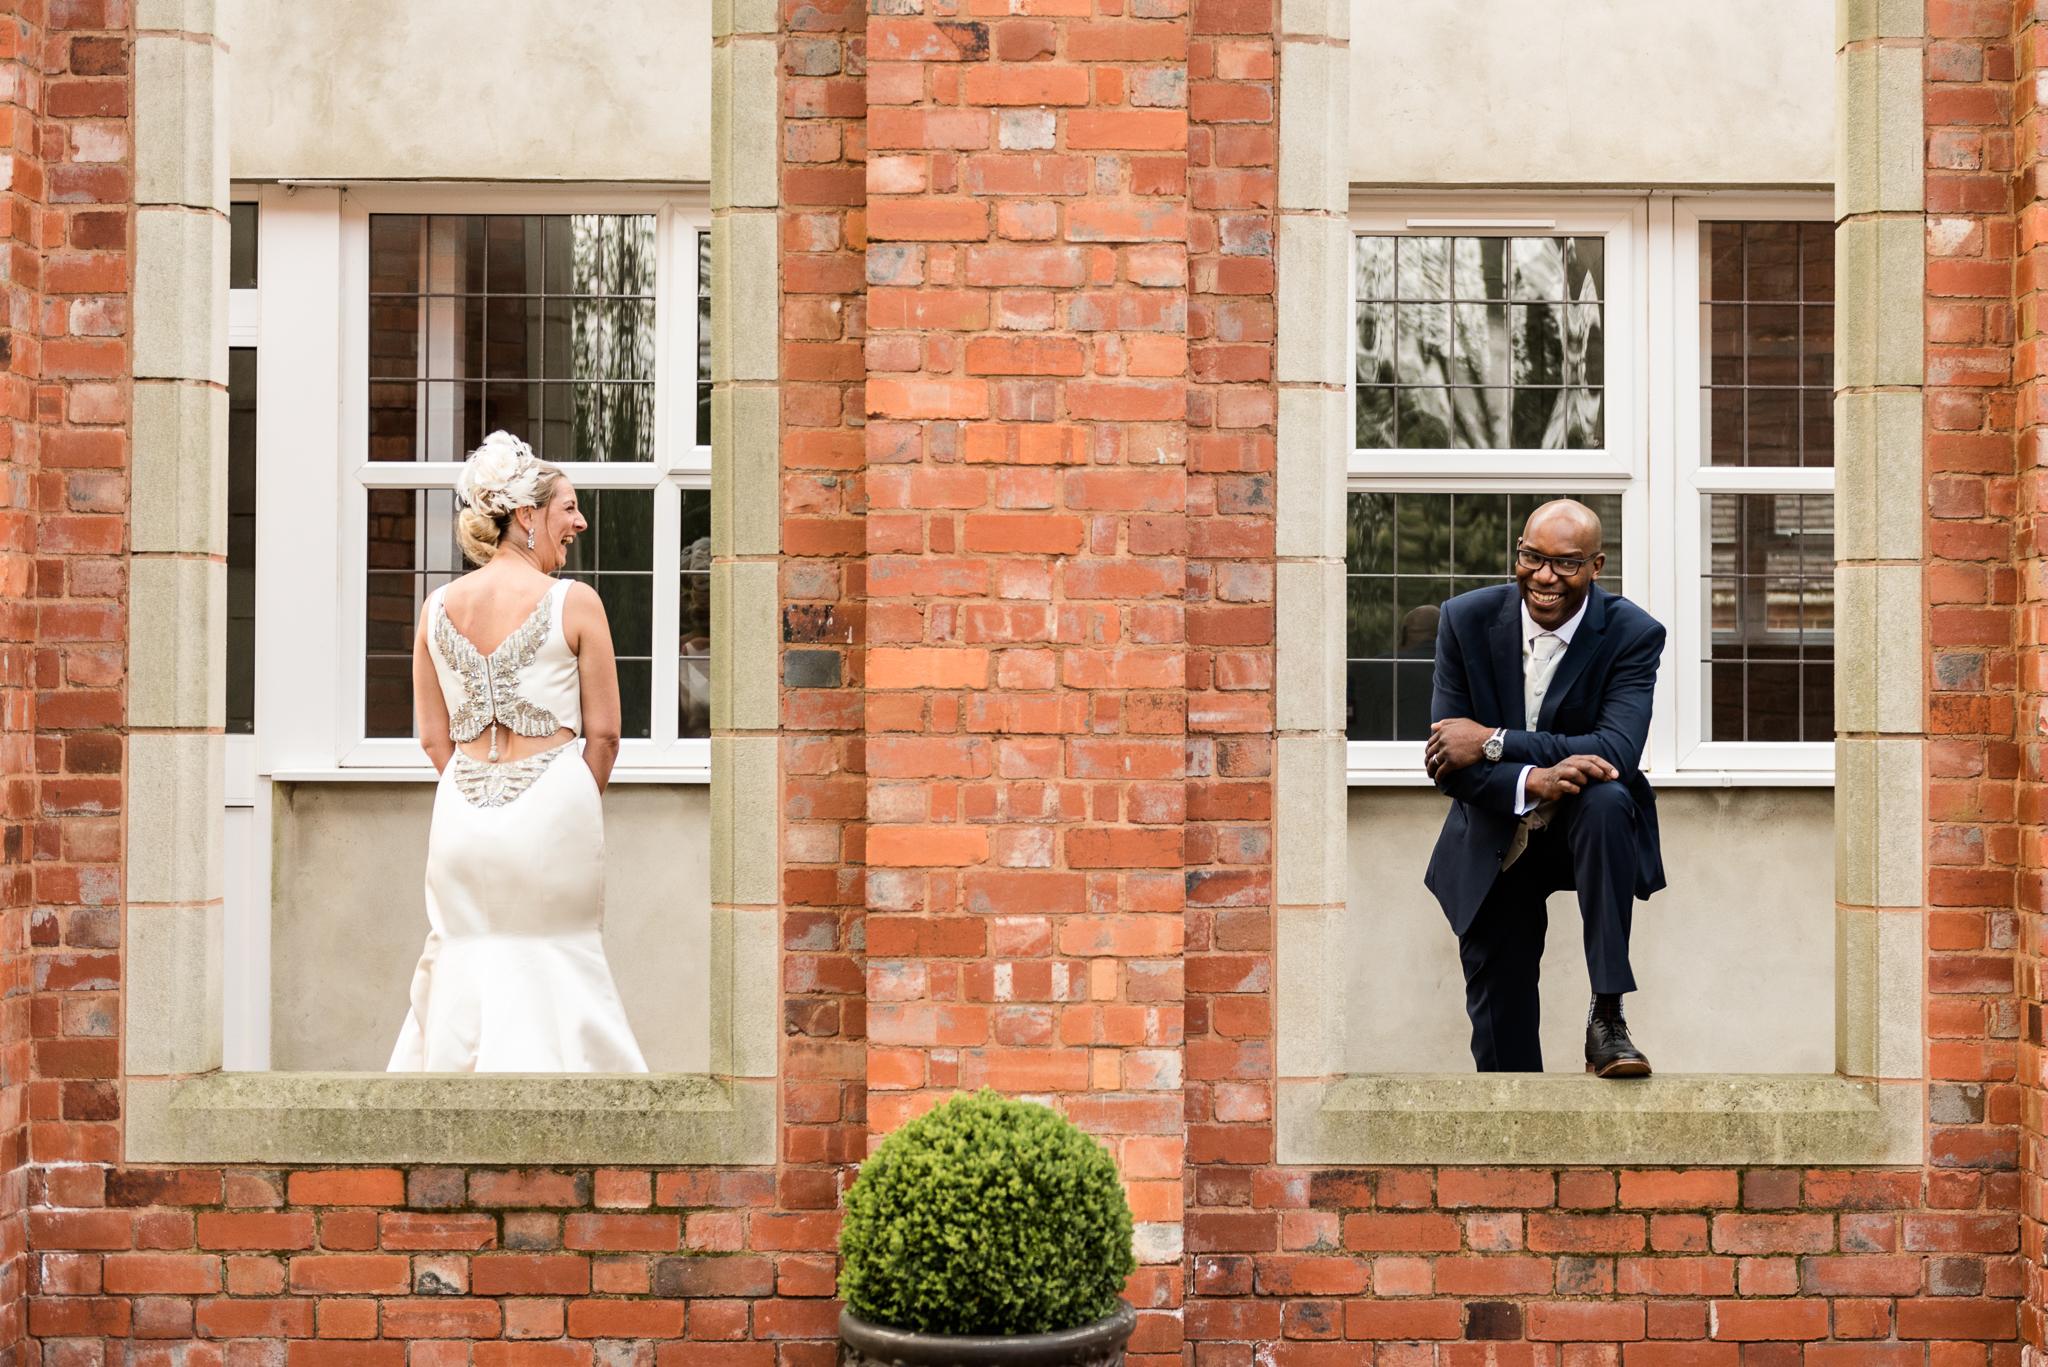 Stylish Easter Wedding at Pendrell Hall Country House Wedding Venue Staffordshire - Jenny Harper-45.jpg